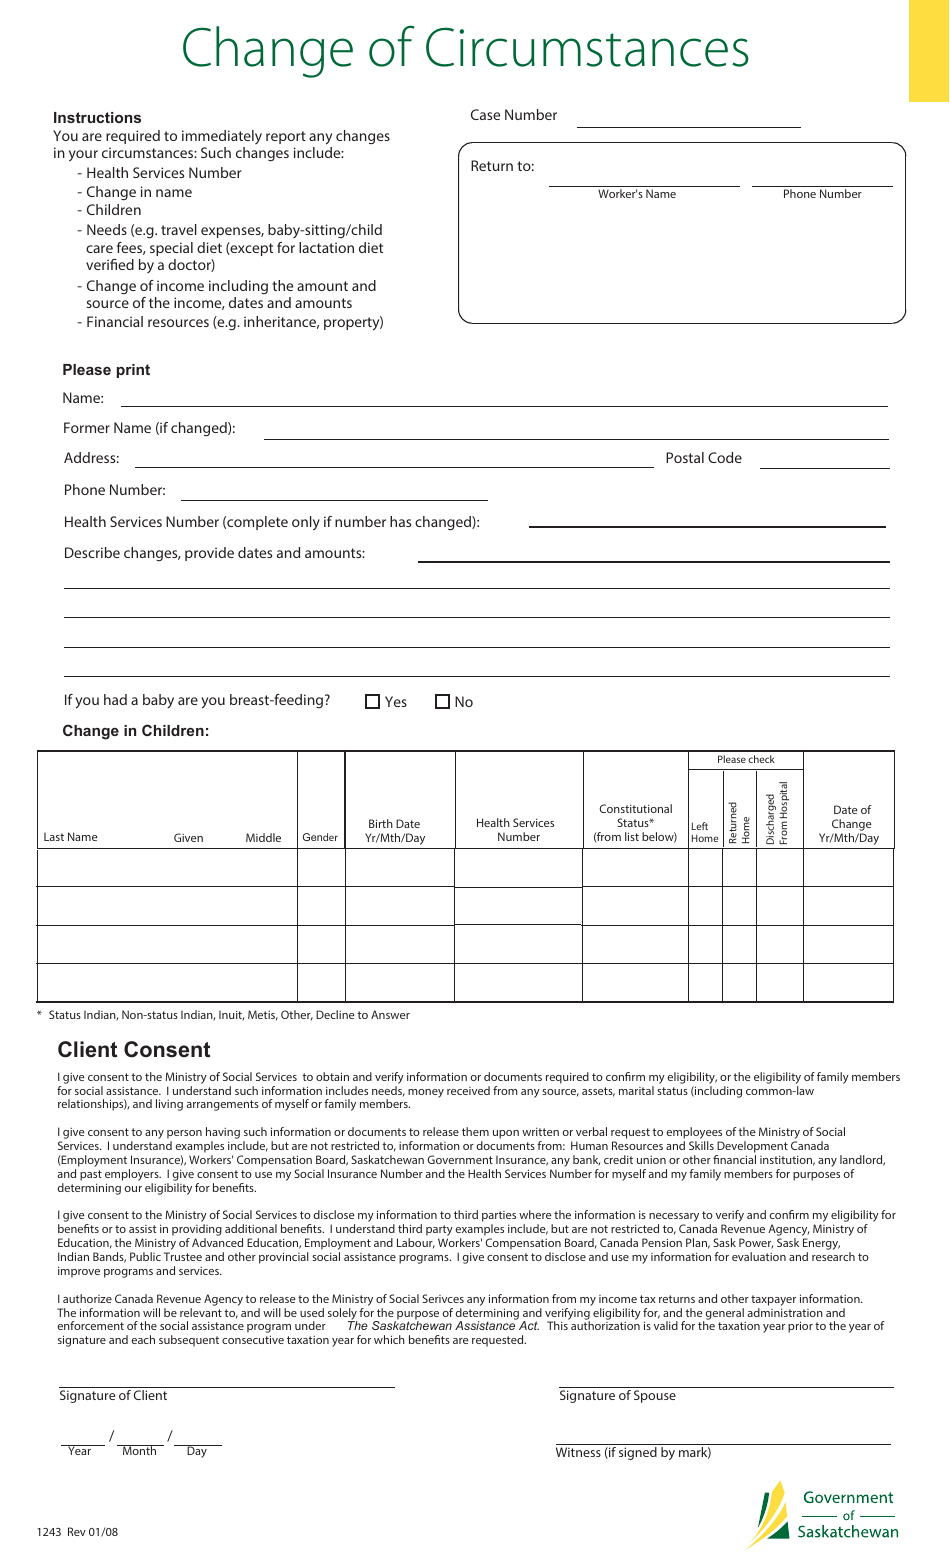 form-1243-fill-out-sign-online-and-download-fillable-pdf